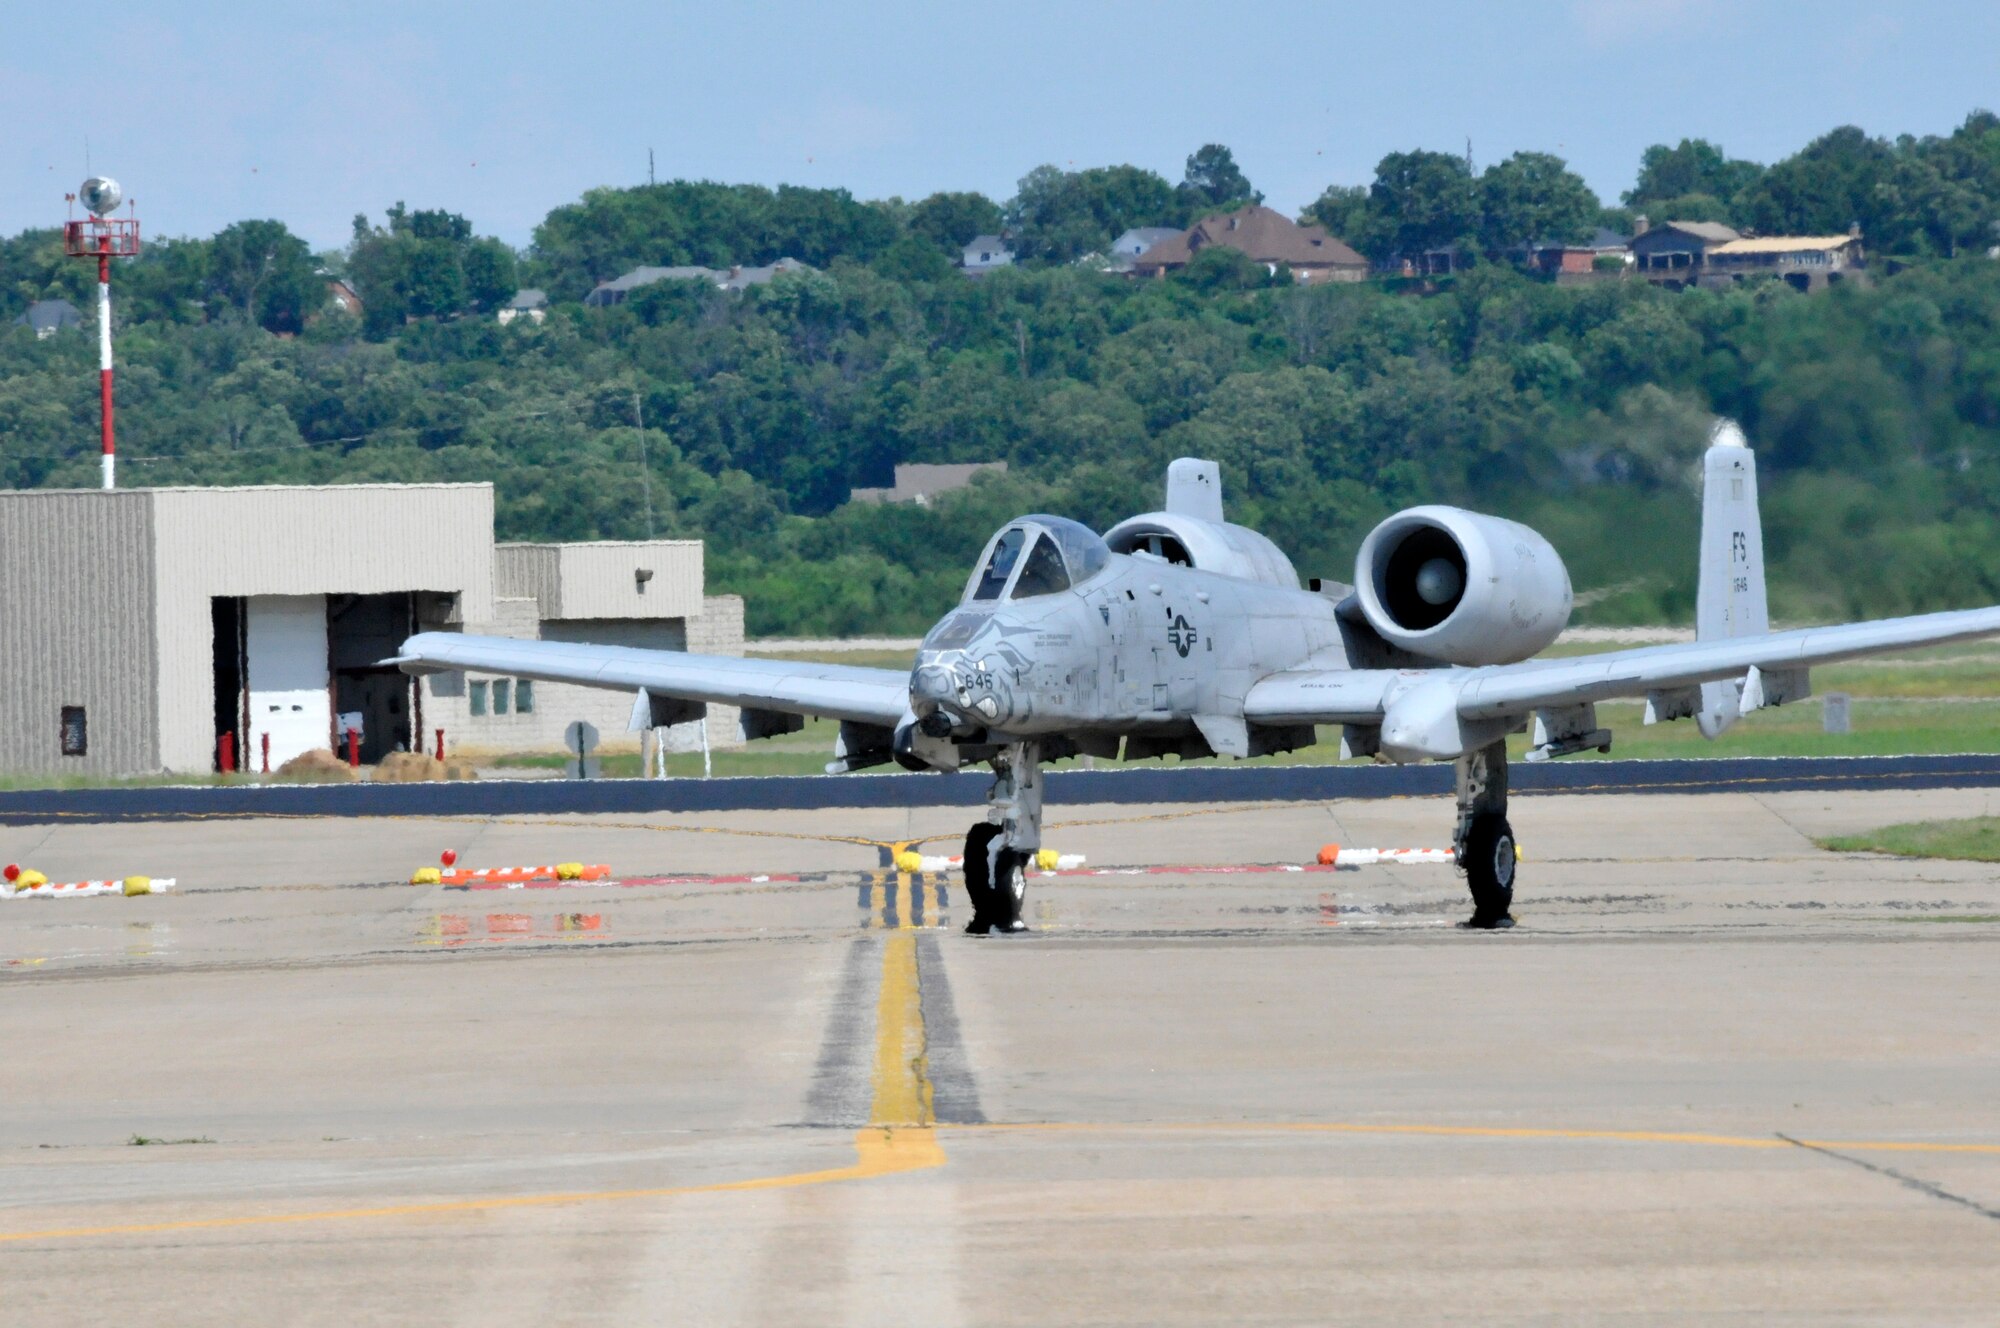 Col. Brian T. Burger, 188th Operations Group commander, conducted his ceremonial fini (final) training flight in the A-10C Thunderbolt II “Warthog” (Tail No. 646) May 15, 2014, at Ebbing Air National Guard Base, Fort Smith, Arkansas. Burger has flown the Warthog longer than any 188th pilot. The last two A-10s depart Fort Smith June 7, 2014, as the 188th transitions from a fighter mission to an intelligence, reconnaissance and surveillance/ remotely piloted aircraft mission. (U.S. Air National Guard photo by Tech Sgt. Josh Lewis/Released)